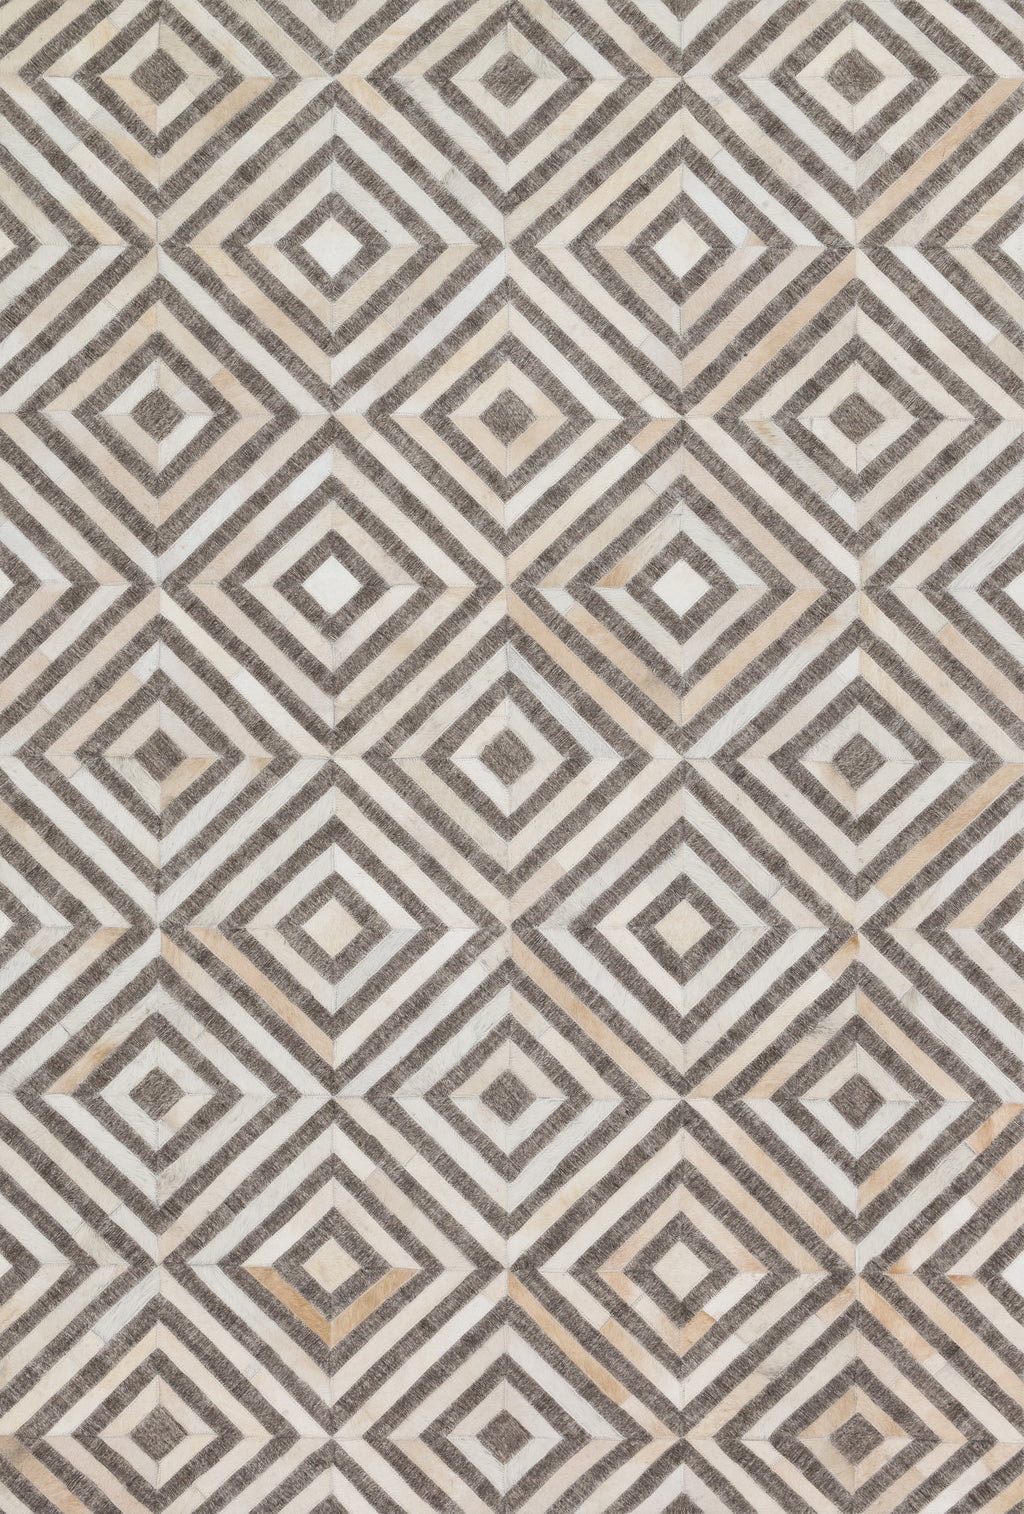 DORADO Collection Wool/Viscose Rug  in  TAUPE / SAND Beige Runner Hand-Loomed Wool/Viscose